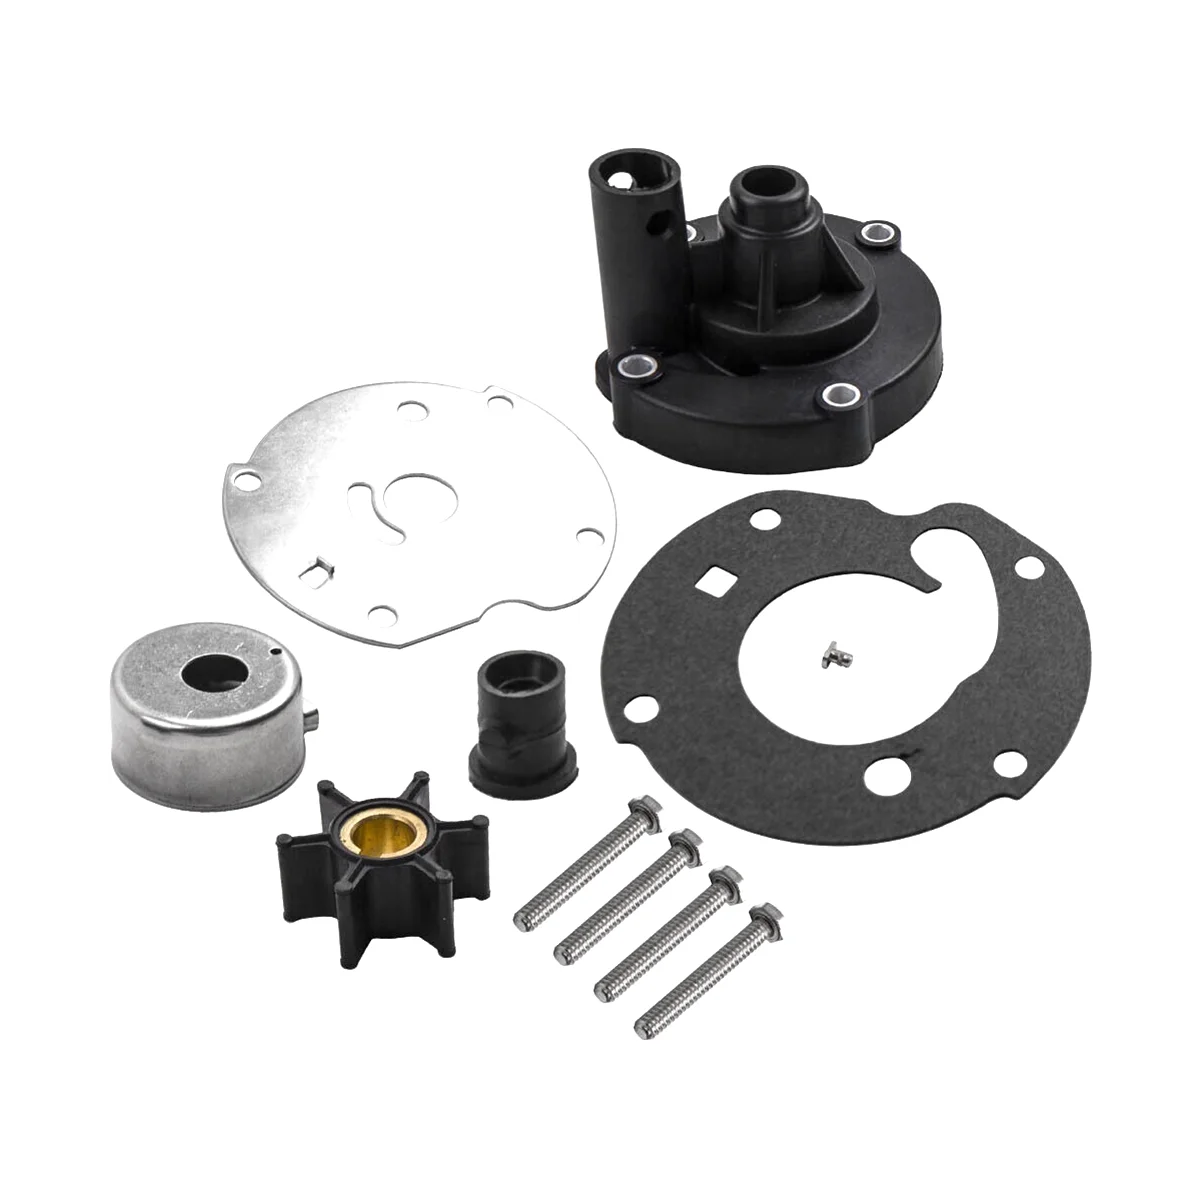 

391391 778166 382797 Water Pump Impeller Kits 763758 Fit for Johnson Evinrude 5.5HP 6HP 7.5HP Outboard Motors